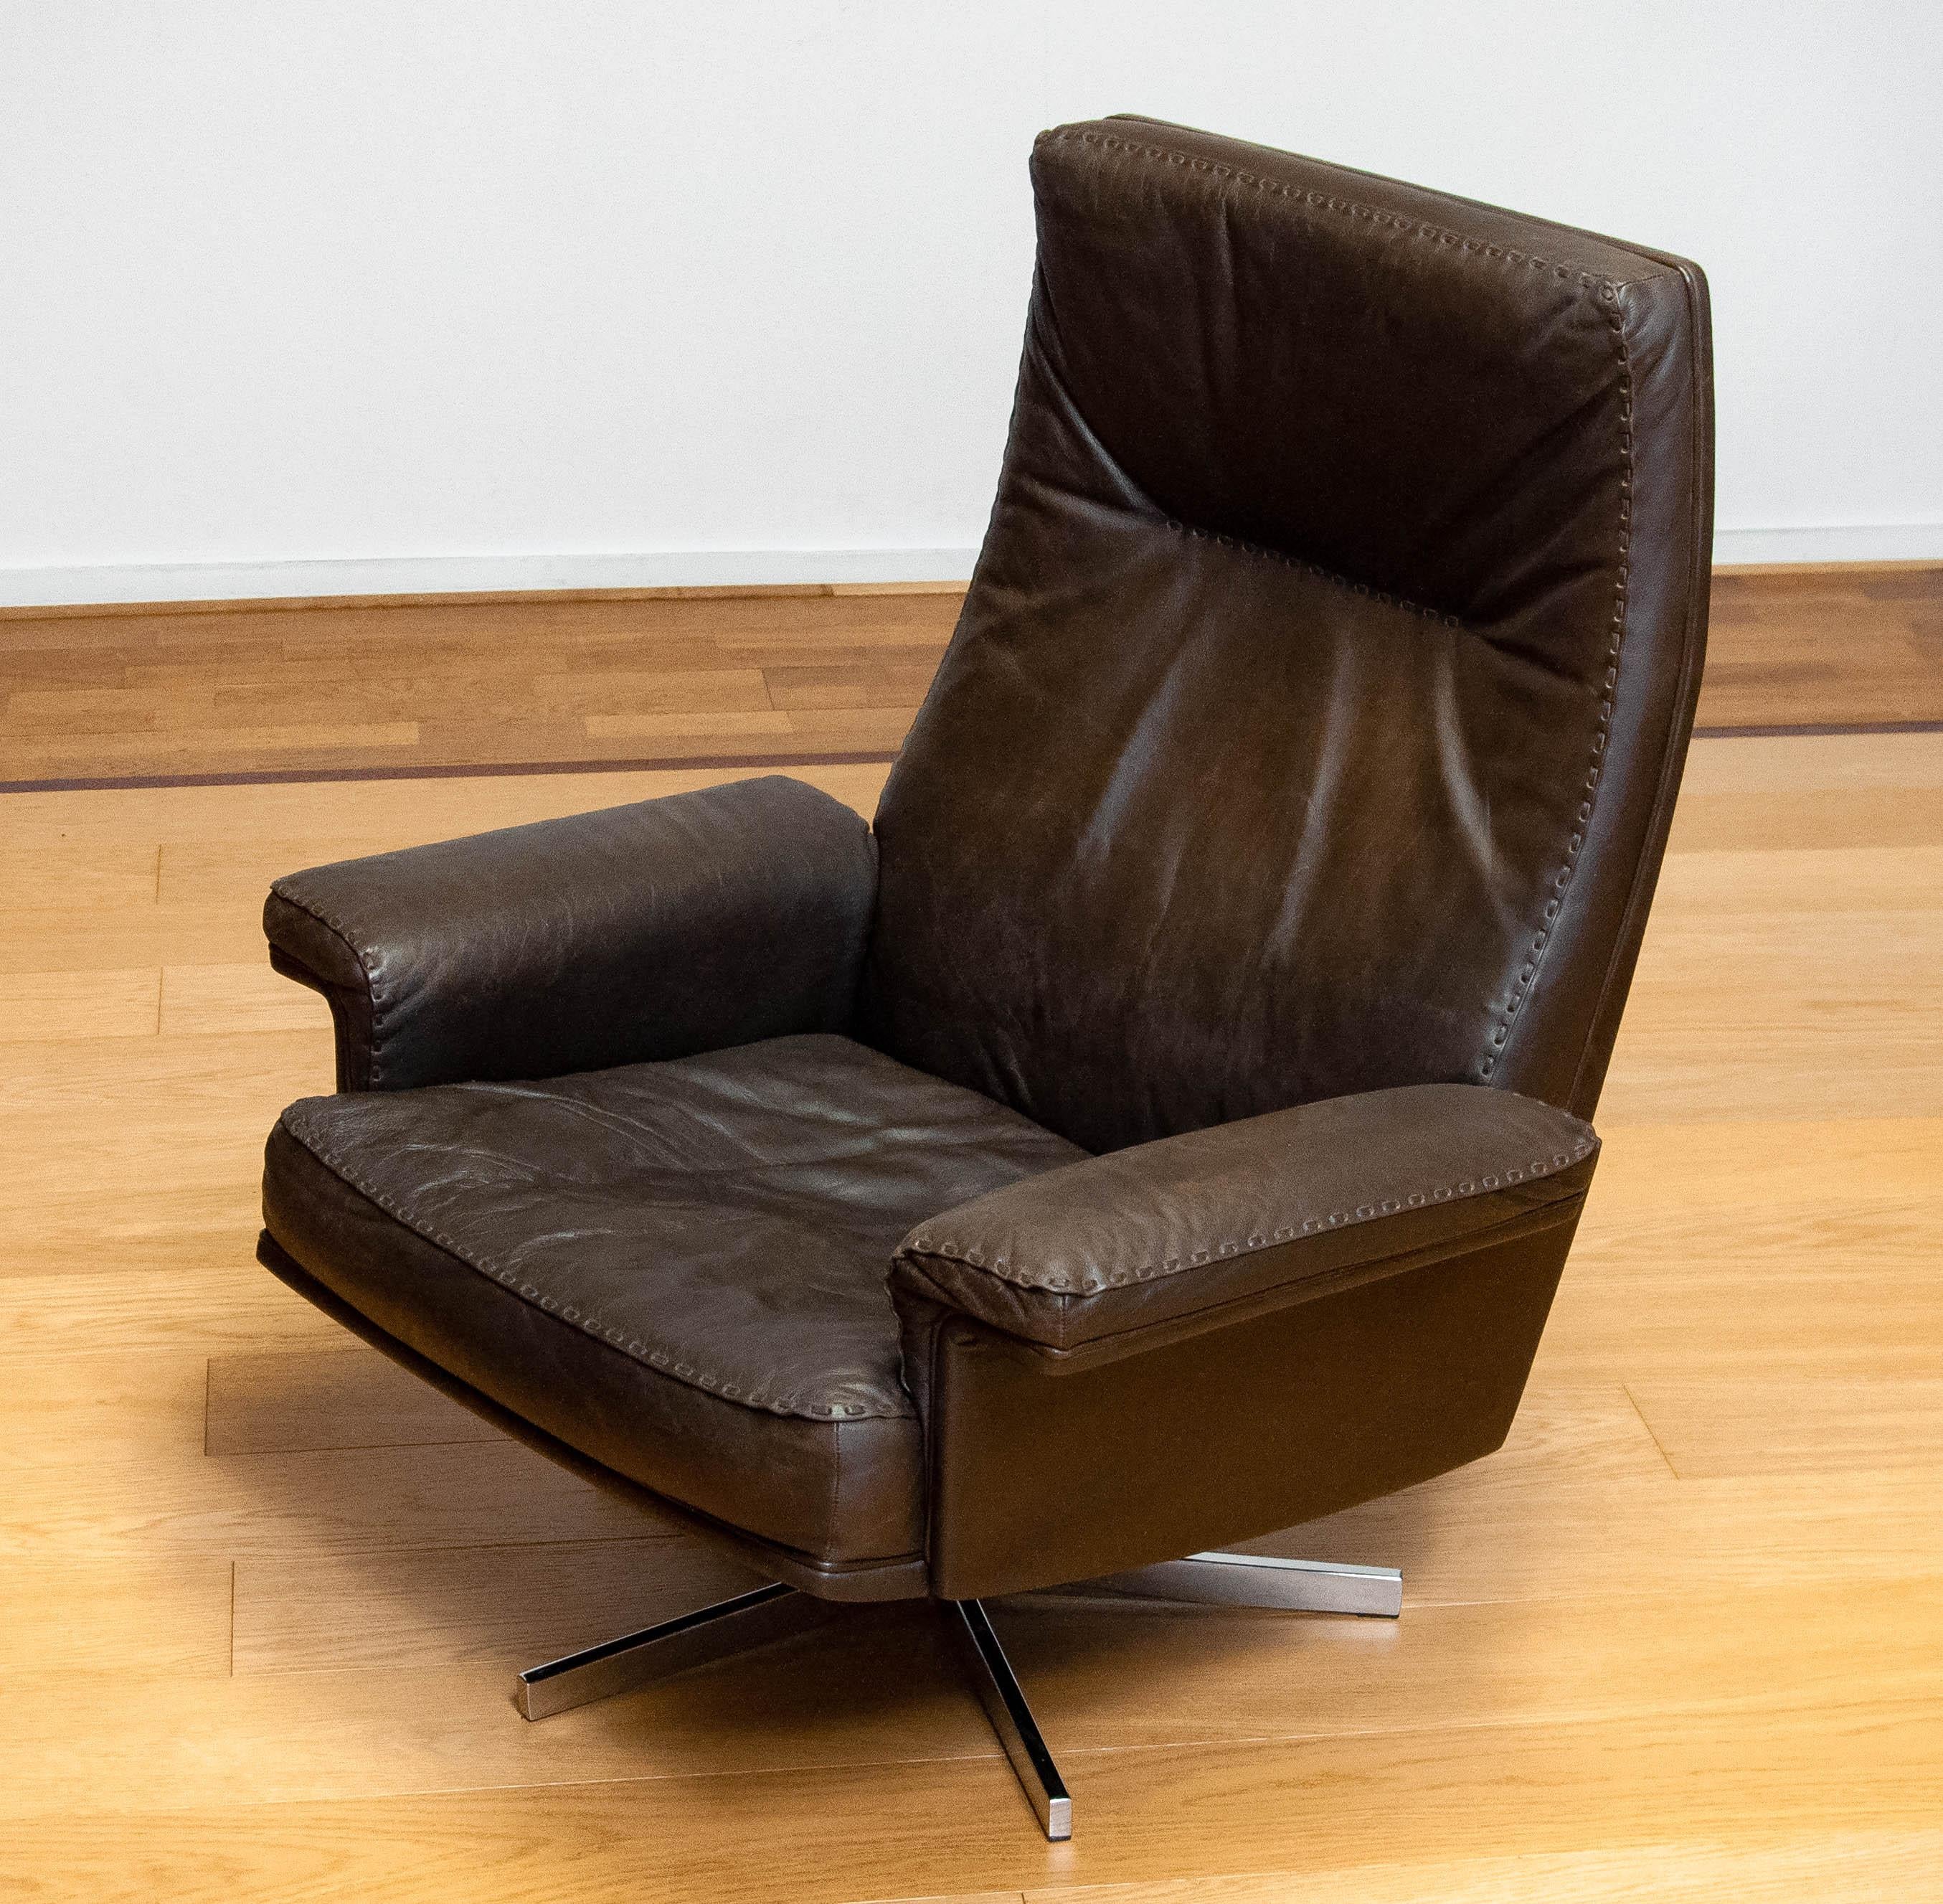 1970s Handstitched Brown Leather Swivel Chair with Chrome Base by De Sede DS-35 2